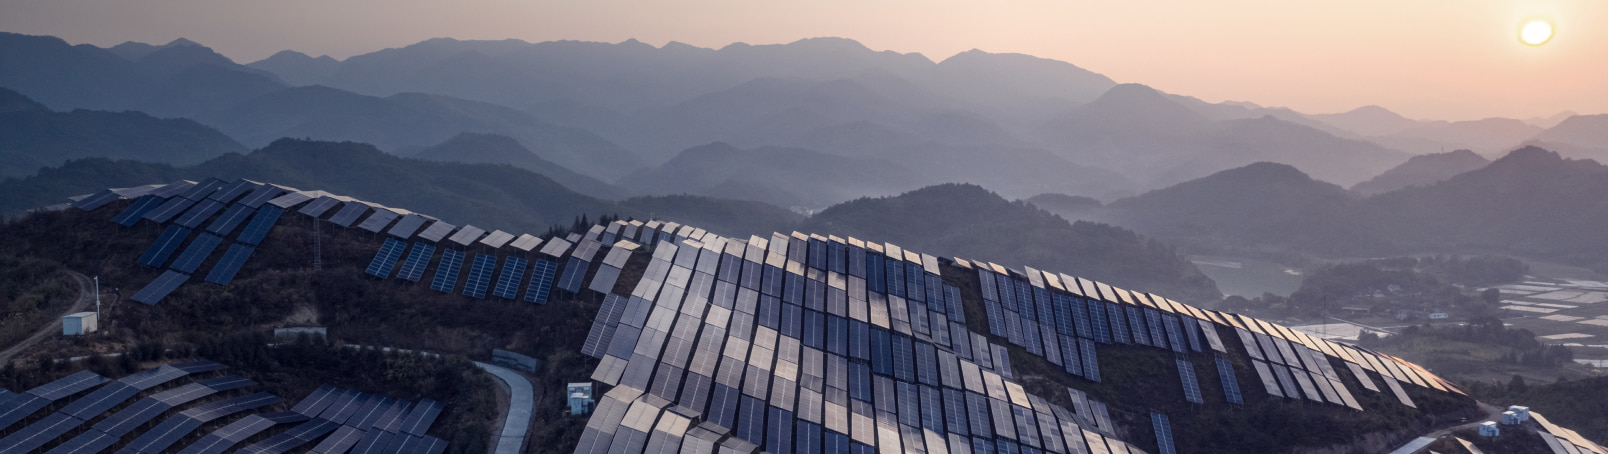 Aerial view of the solar power plant on the top of the mountain at sunset 